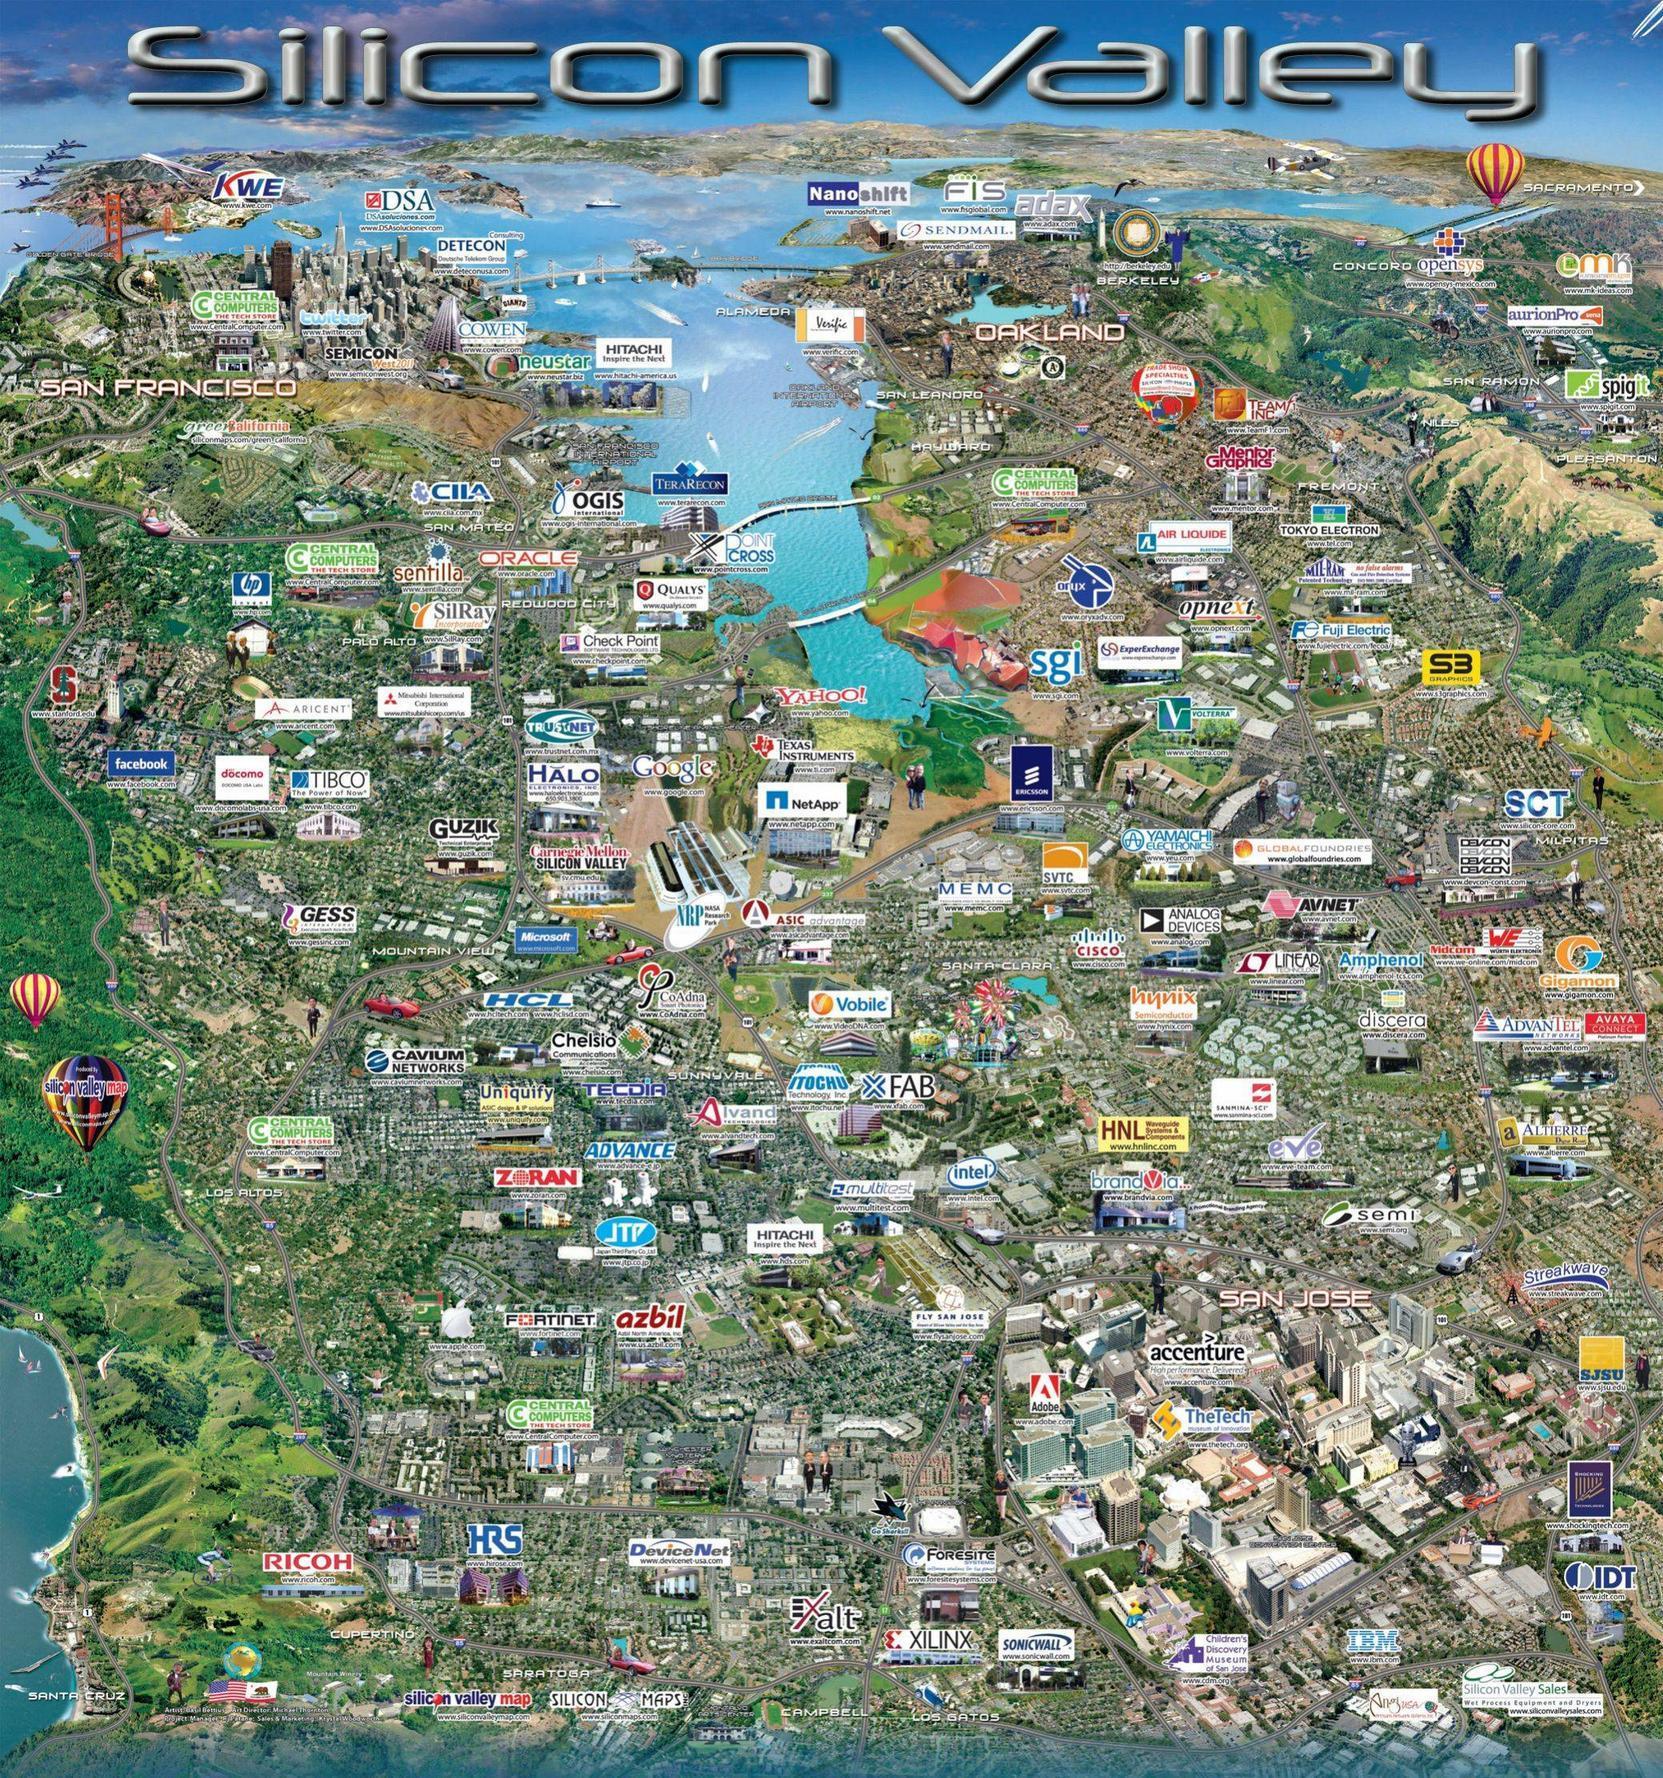 Silicon Valley Map. Pretty Landscapes. Maps and Thanks